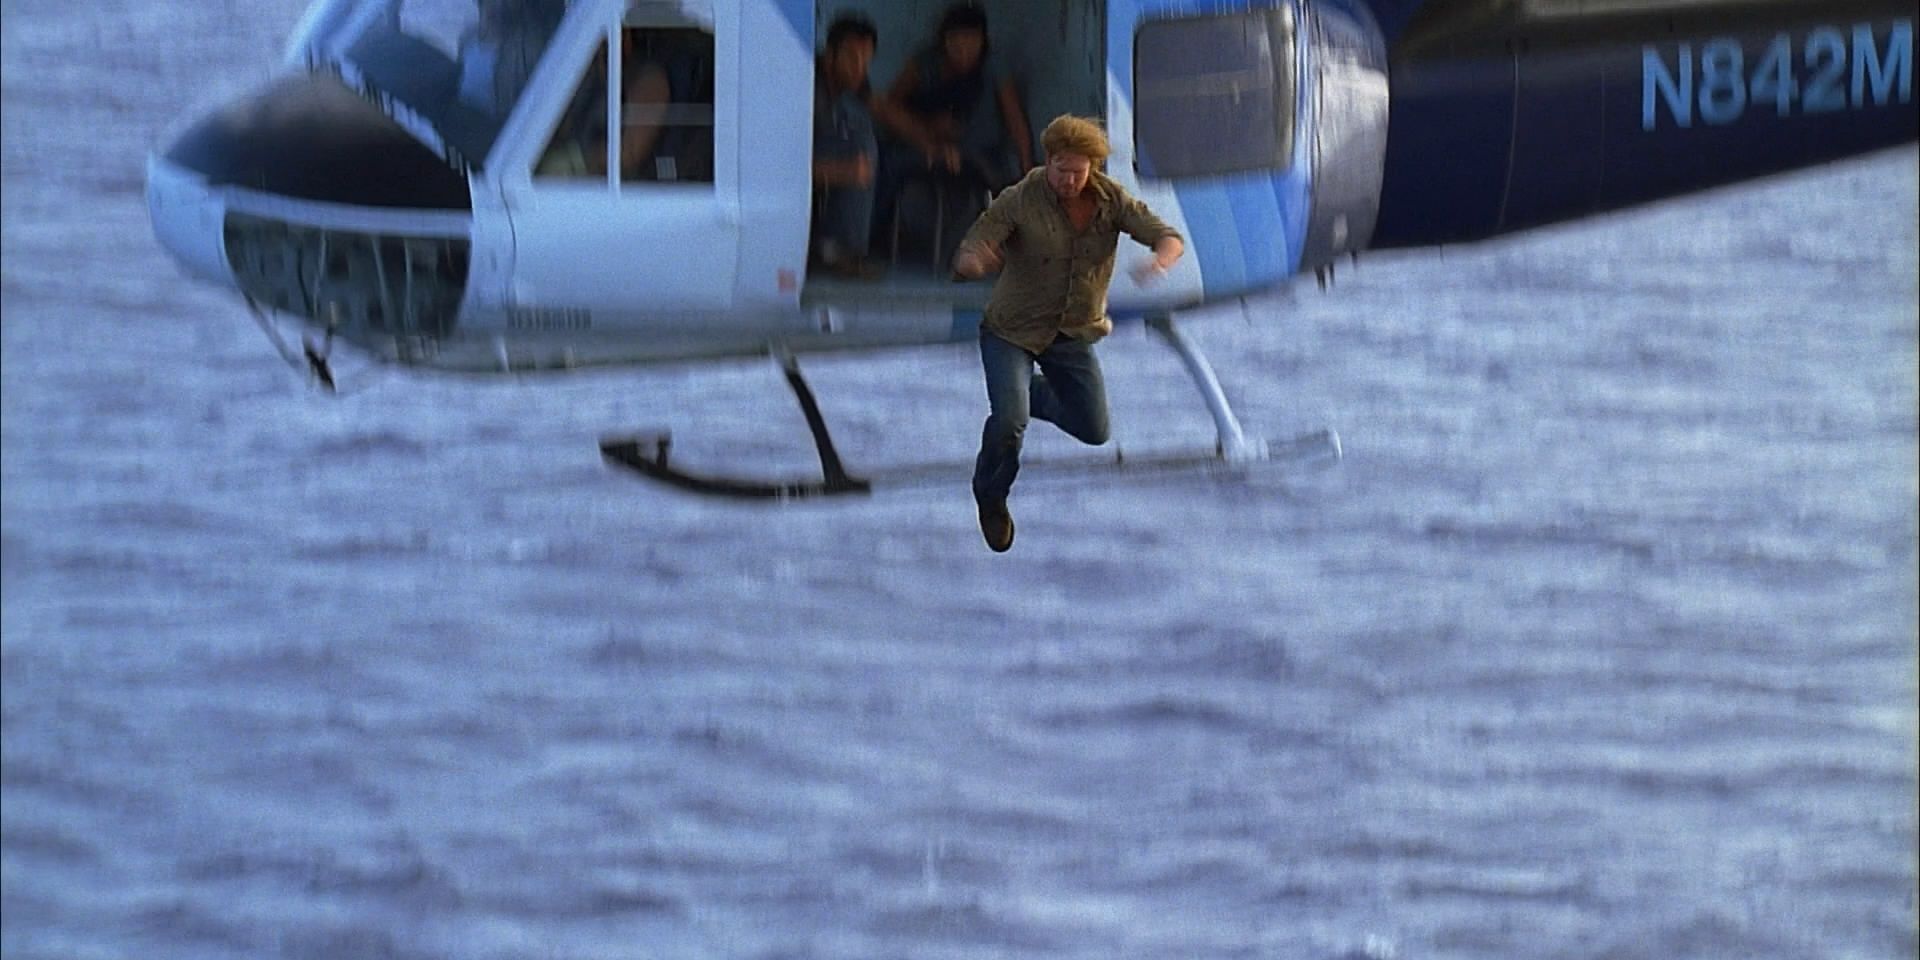 Sawyer jumps from the helicopter